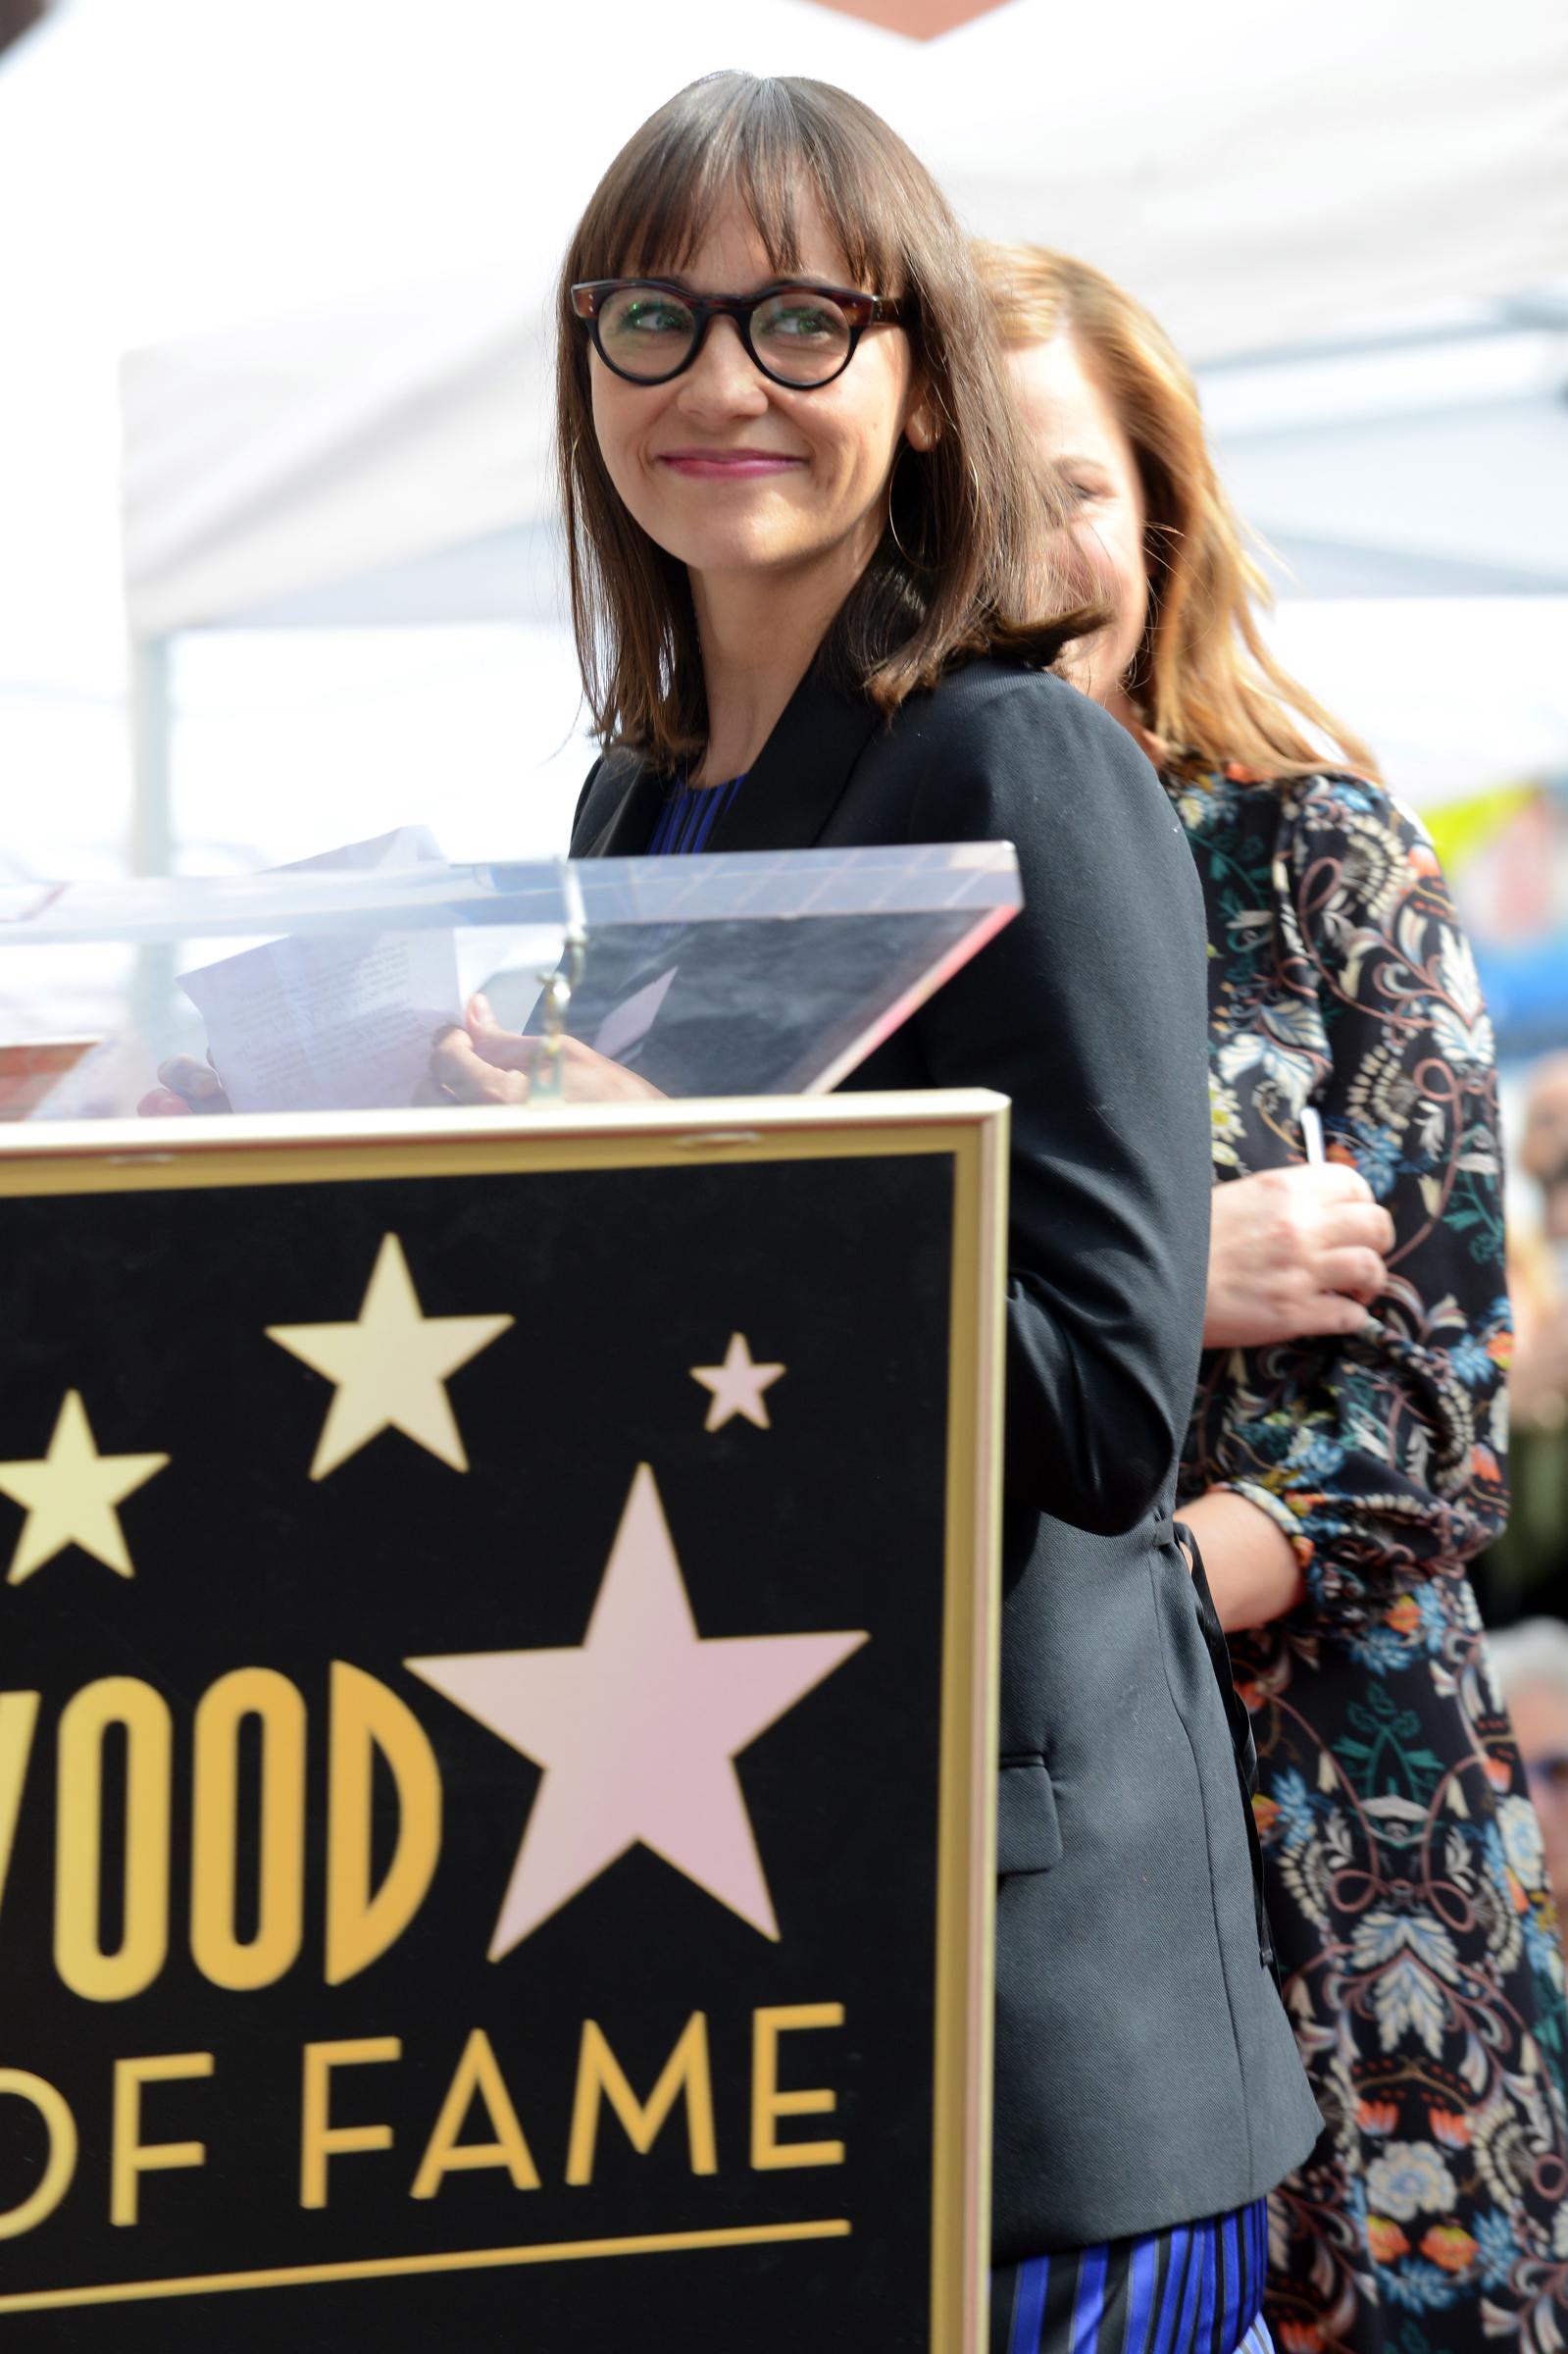 Rashida Jones at Amy Poehler's Star Ceremony on The Hollywood Walk of Fame held in Hollywood, California, on December 3, 2015. | Source: Getty Images